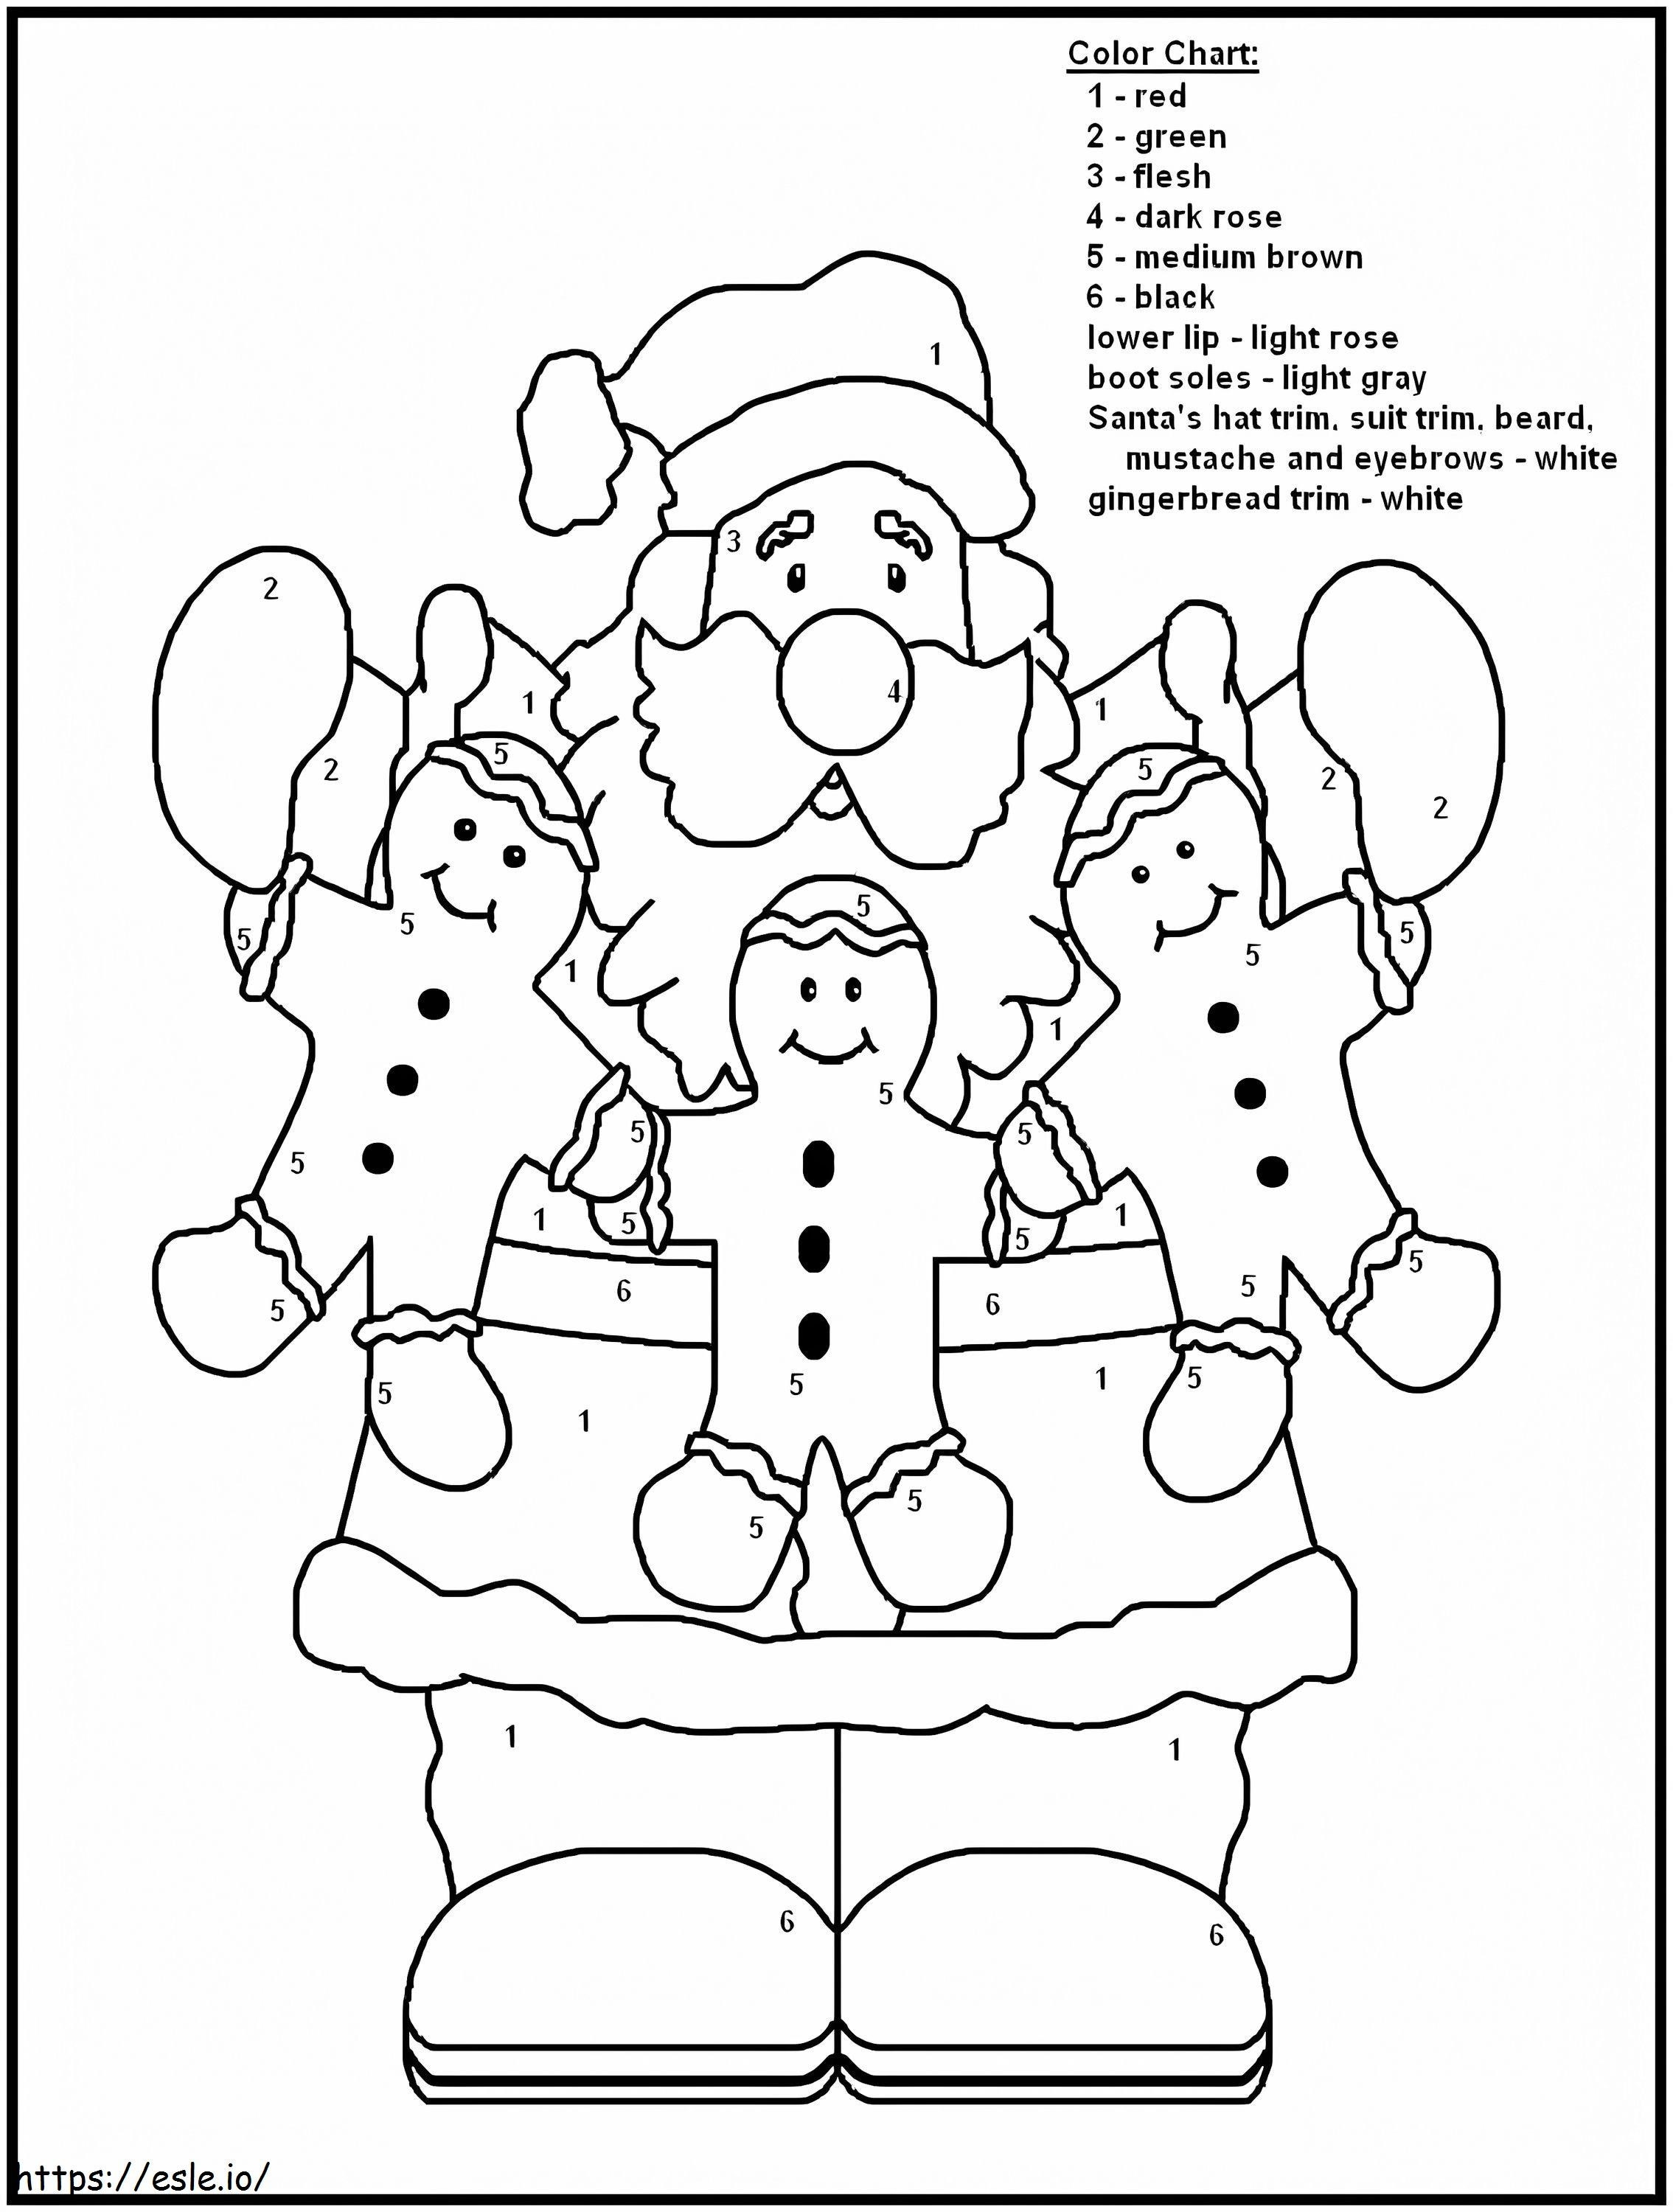 Funny Santa Color By Number coloring page